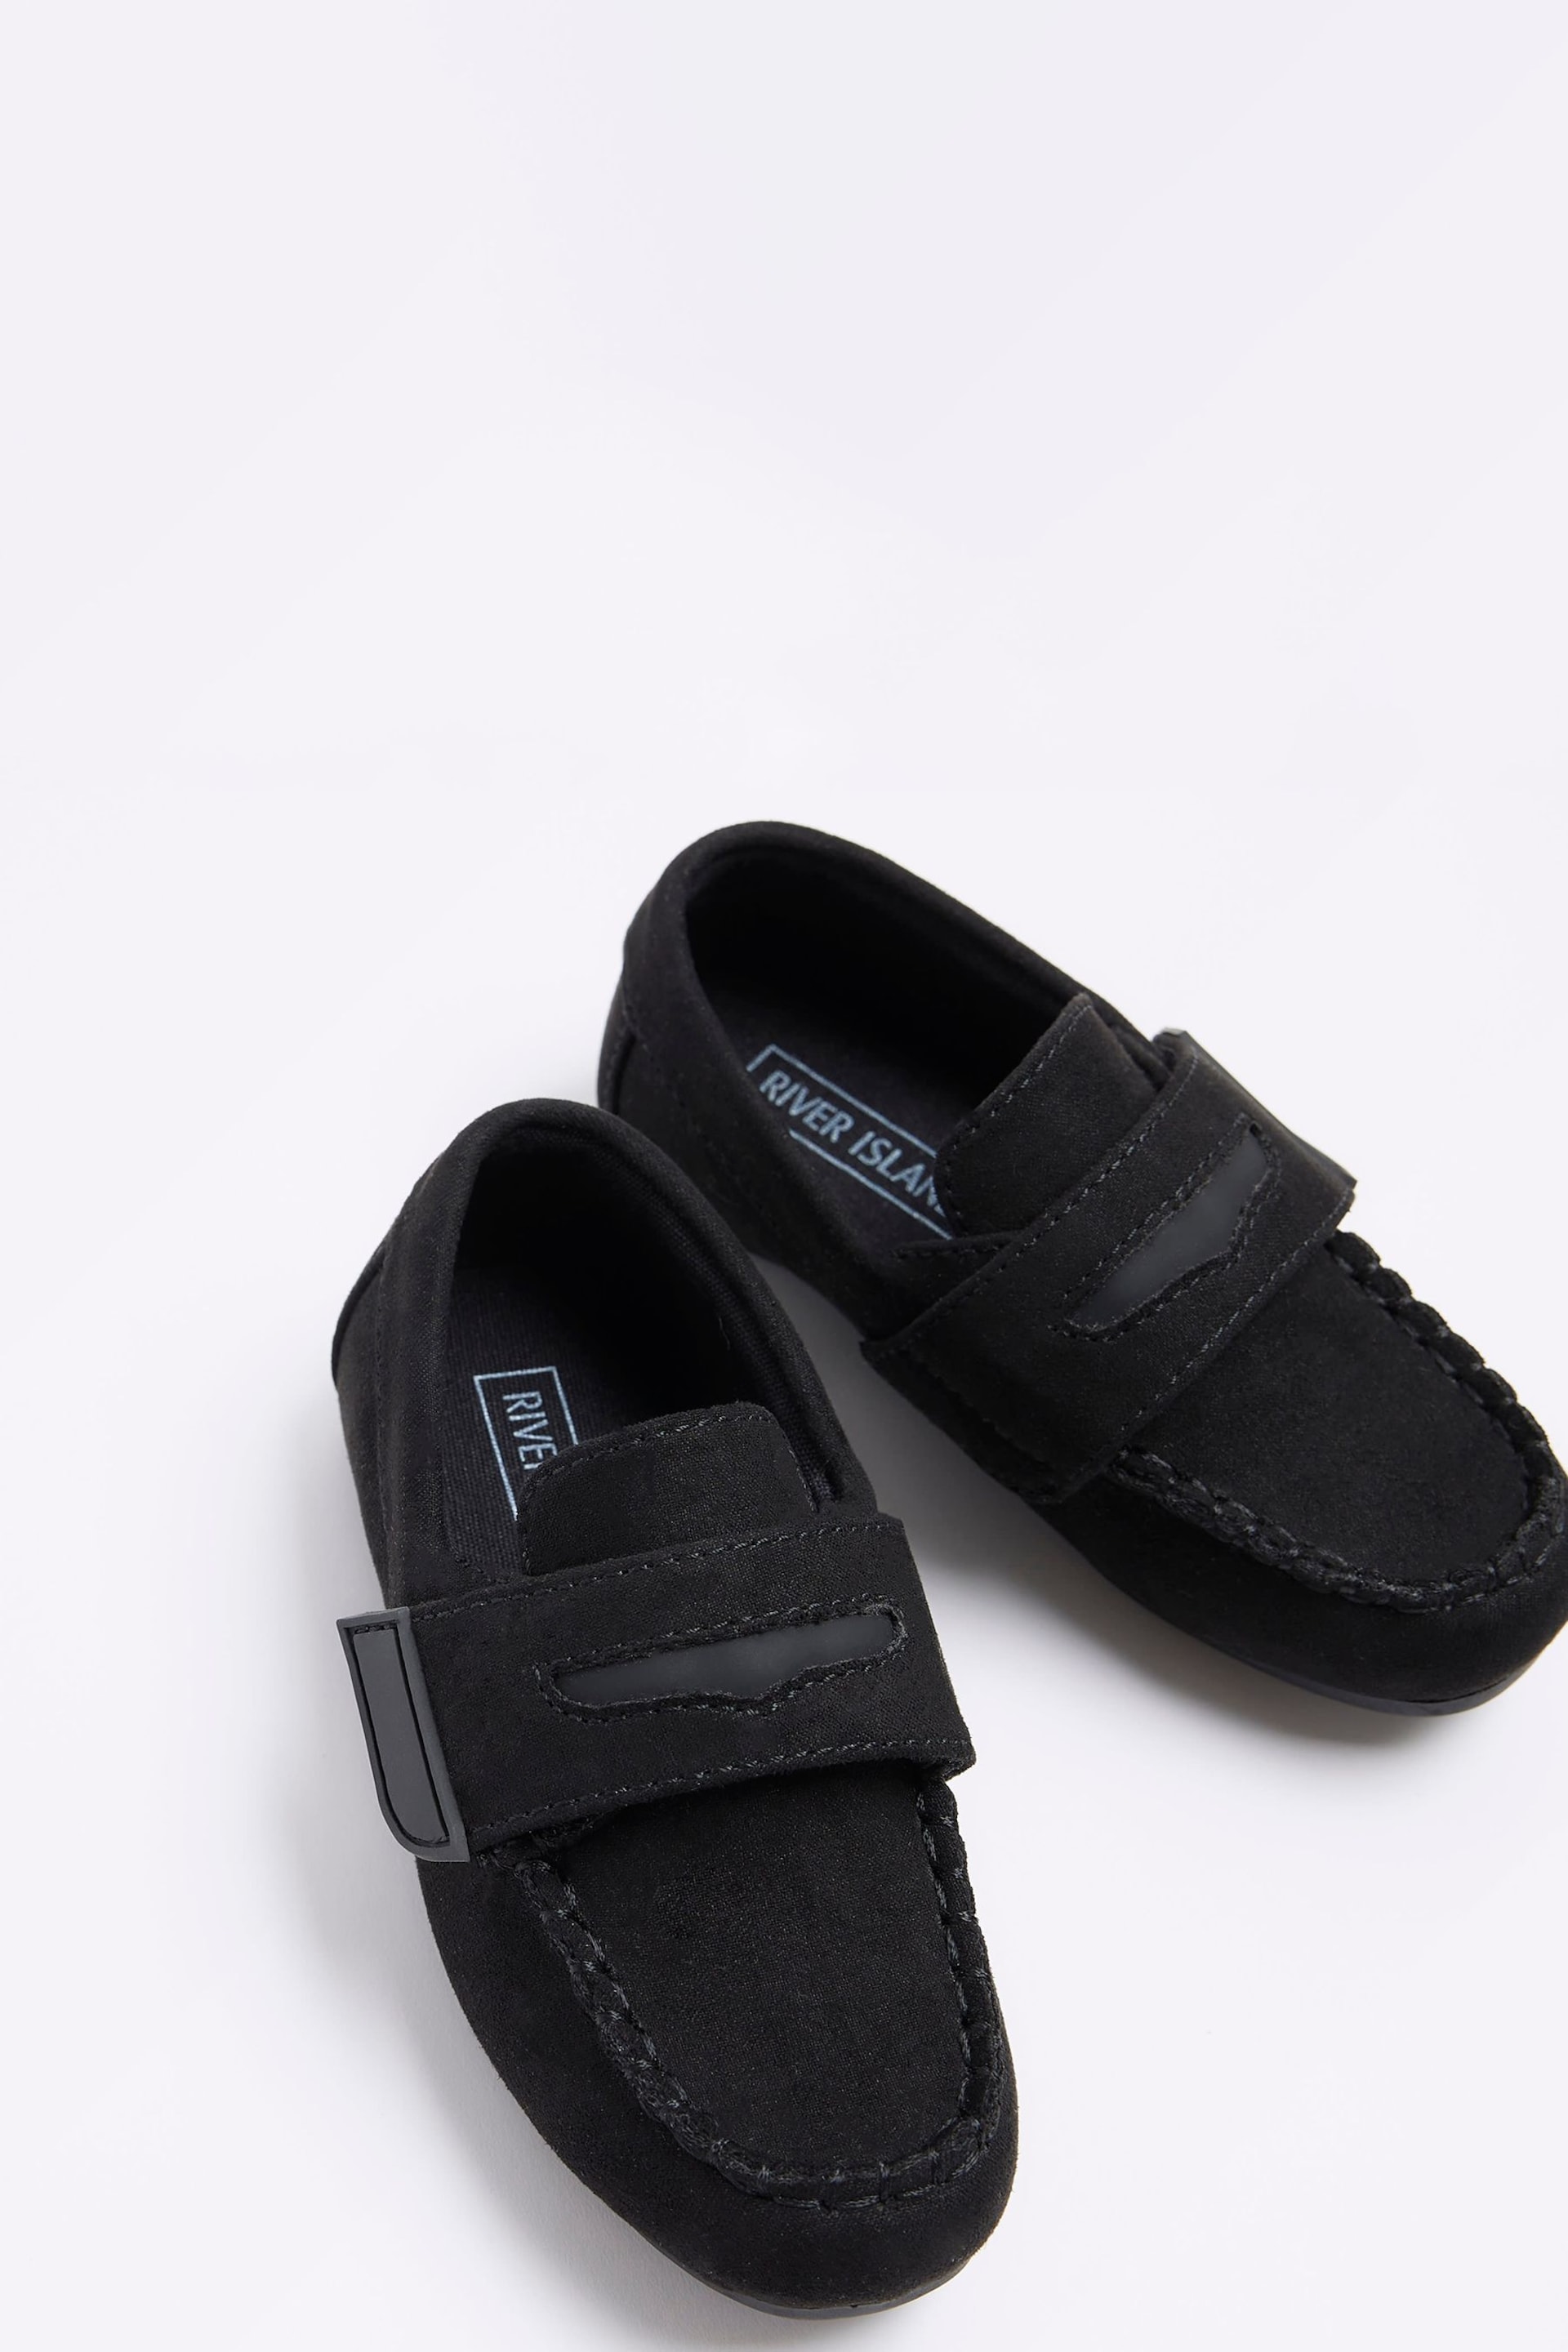 River Island Black Boys Velcro Loafers - Image 3 of 4